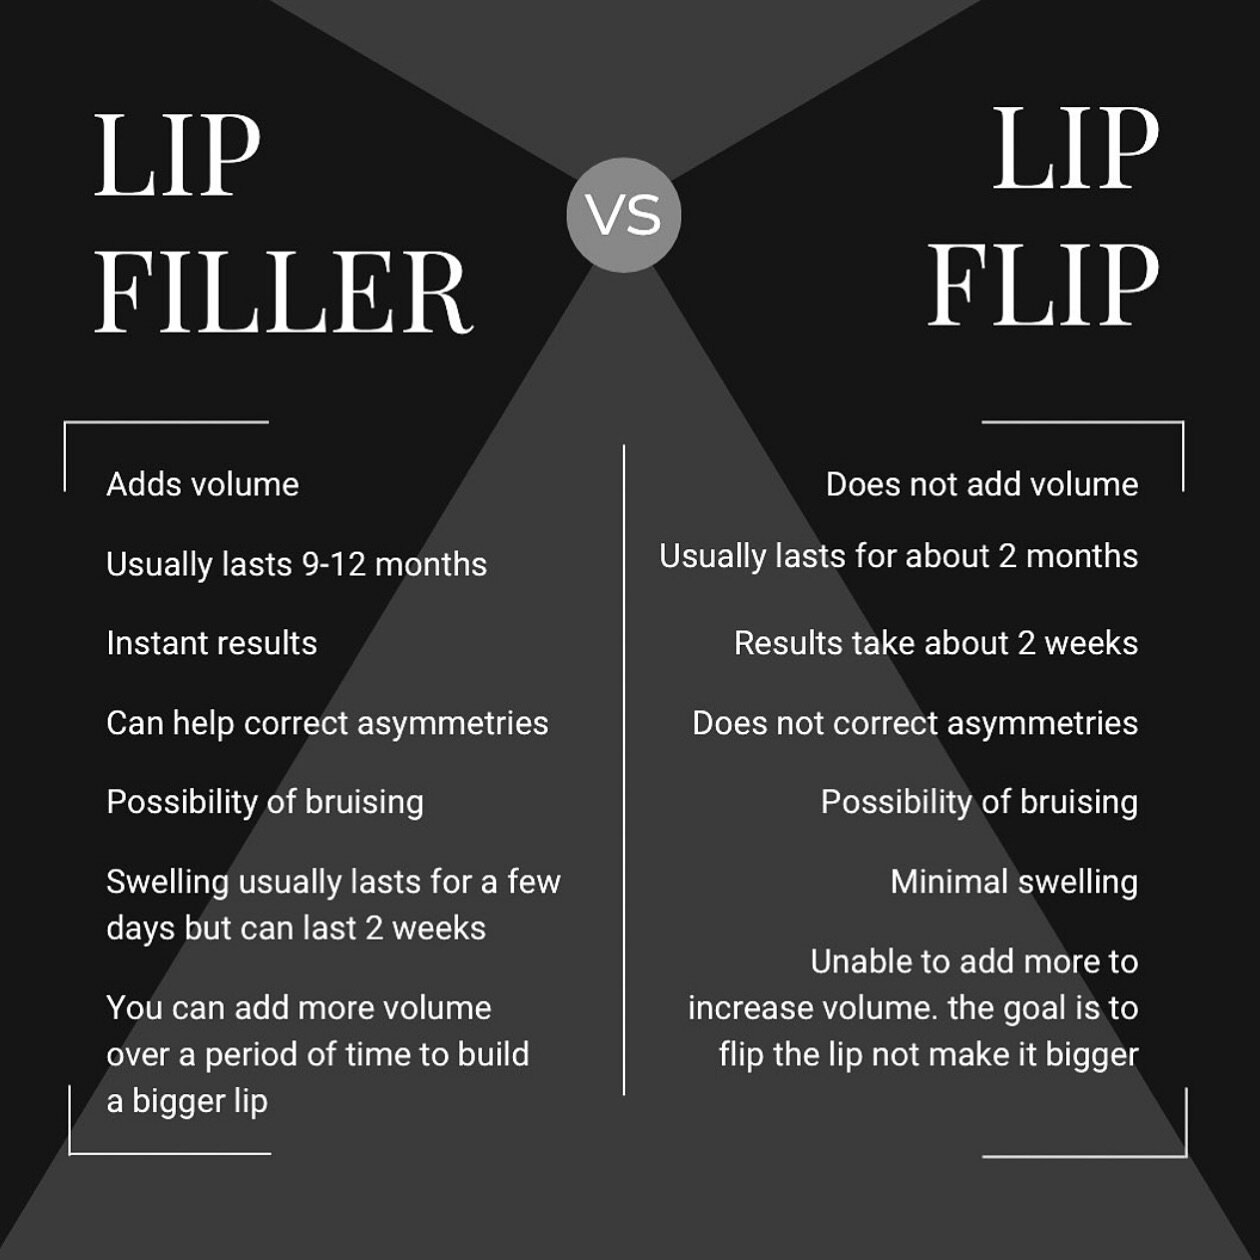 What&rsquo;s the difference between Lip Filler and a Lip Flip?👄

Lip filler involves the injection of hyaluronic acid filler to enhance the volume and shape of the lips.

A lip flip is where a small amount of Botox is injected around the lips to rel